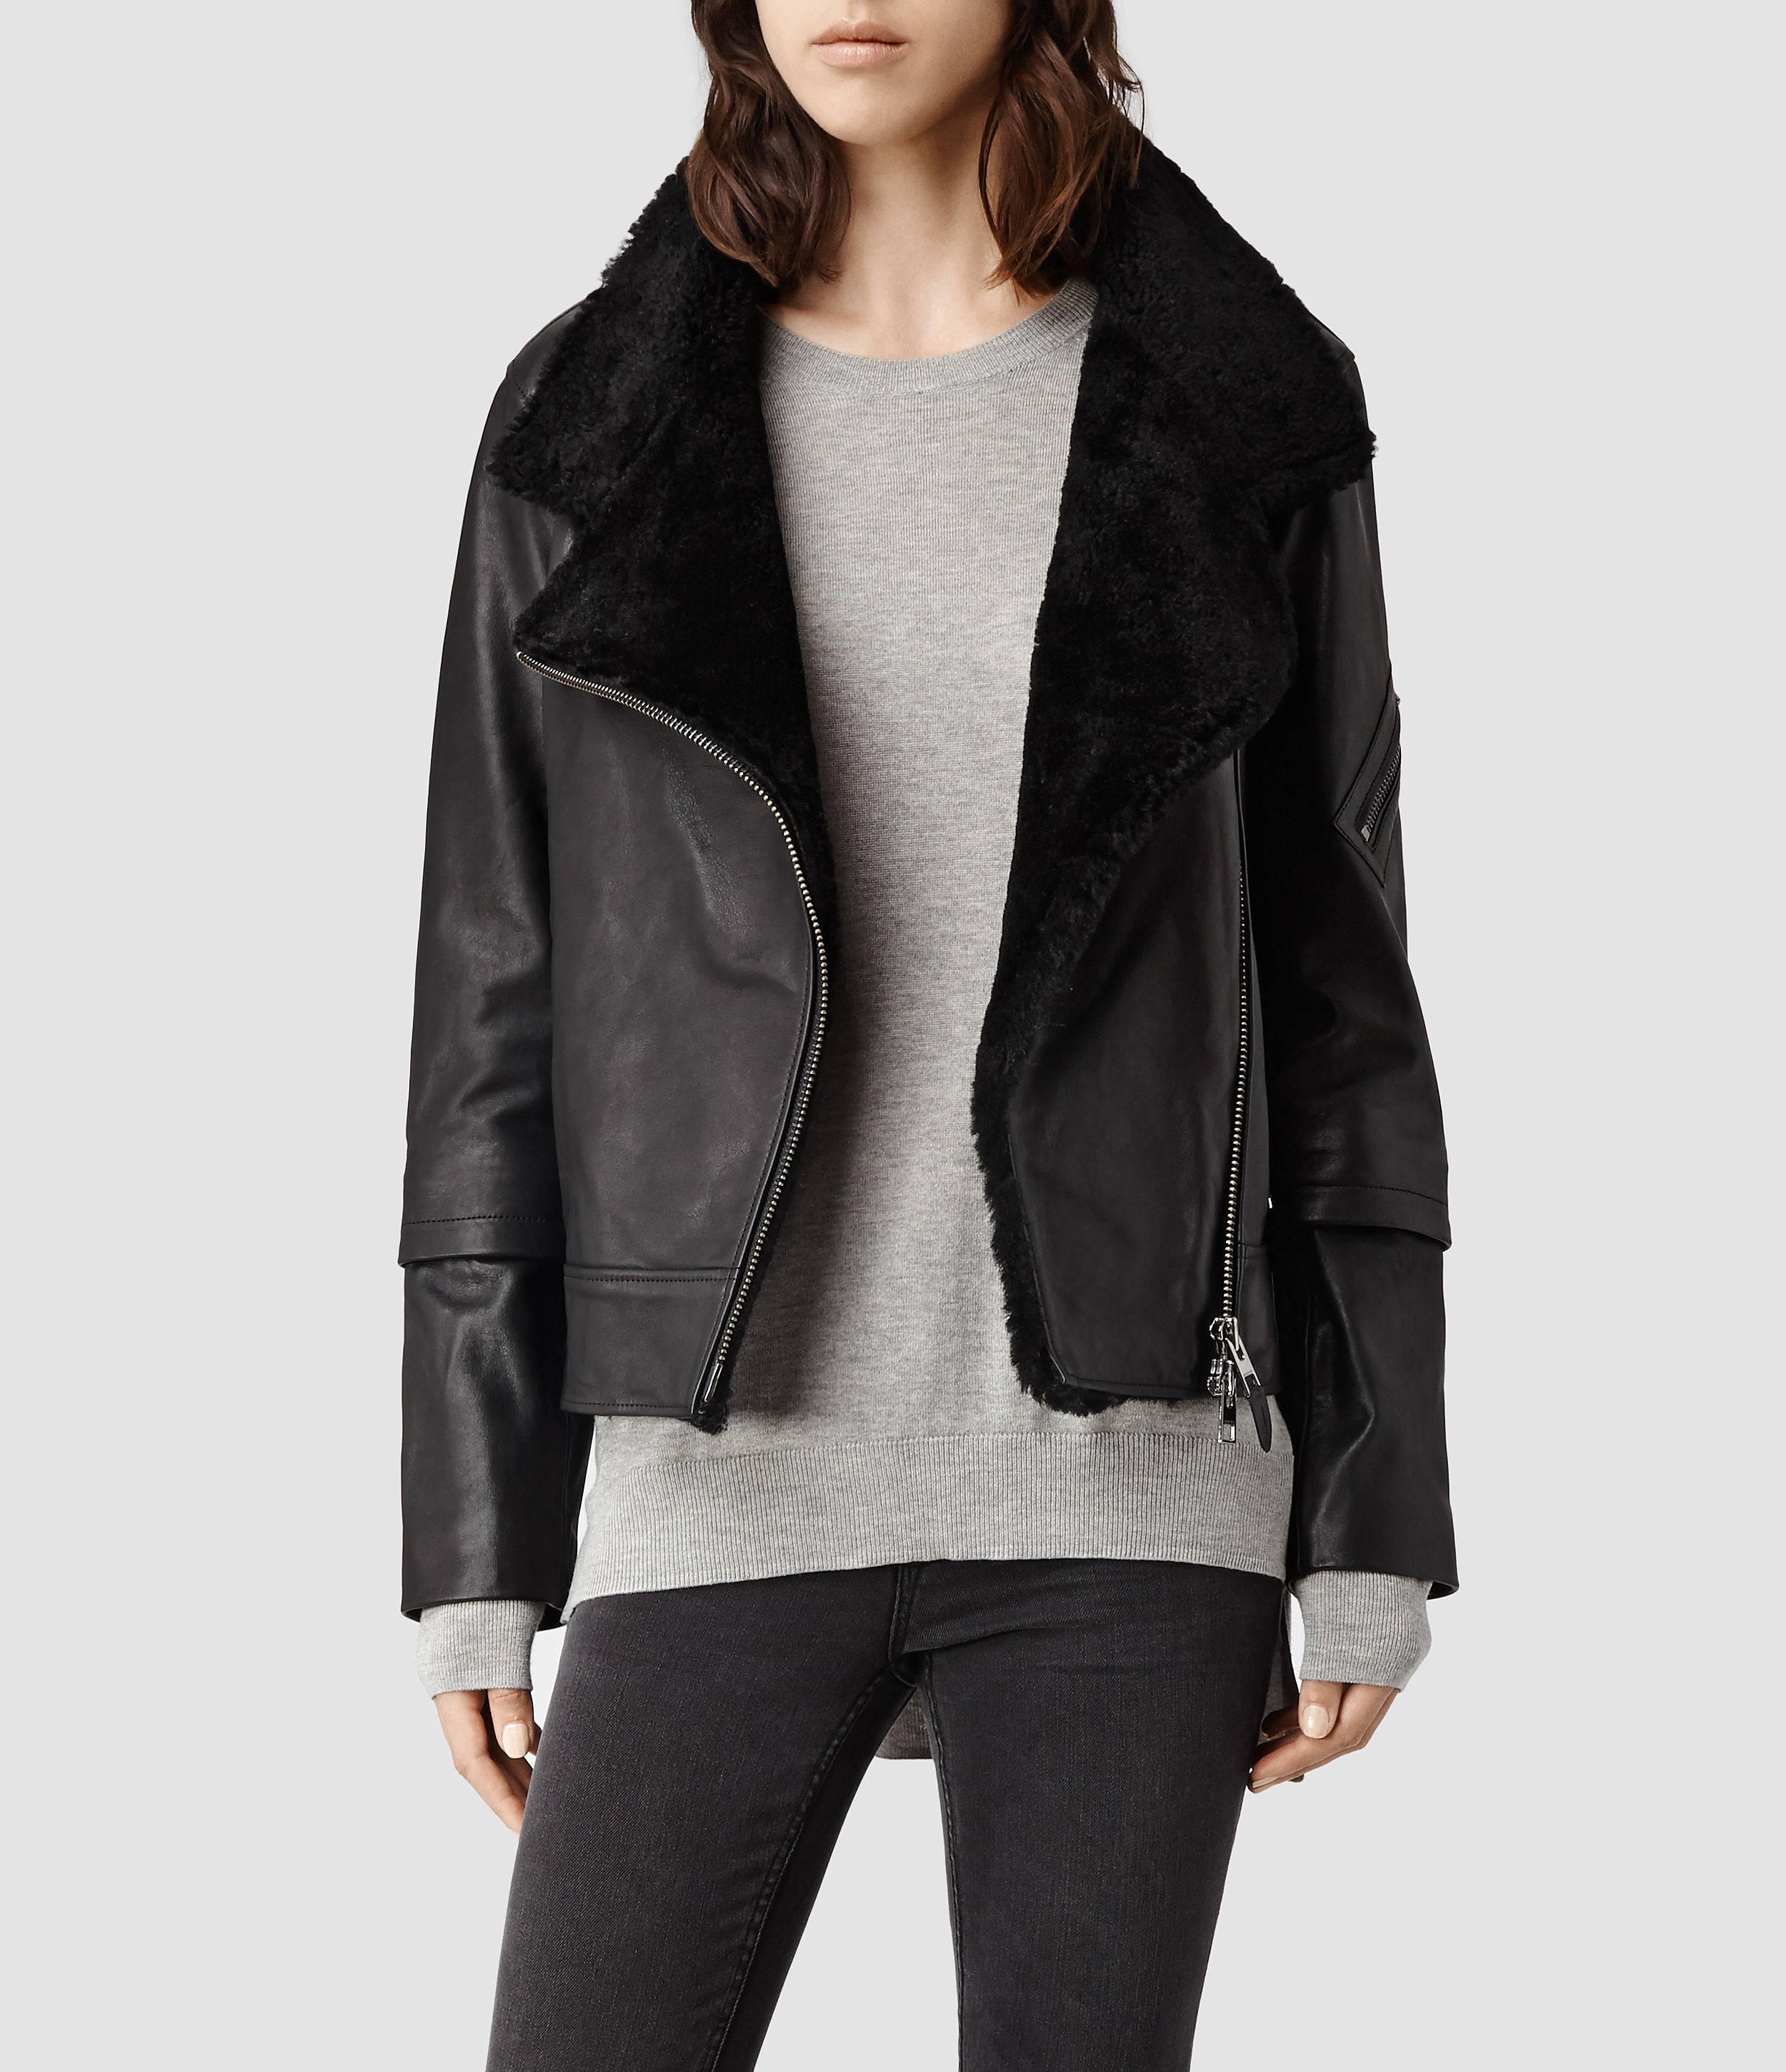 AllSaints Bayes Shearling Leather Jacket in Black - Lyst